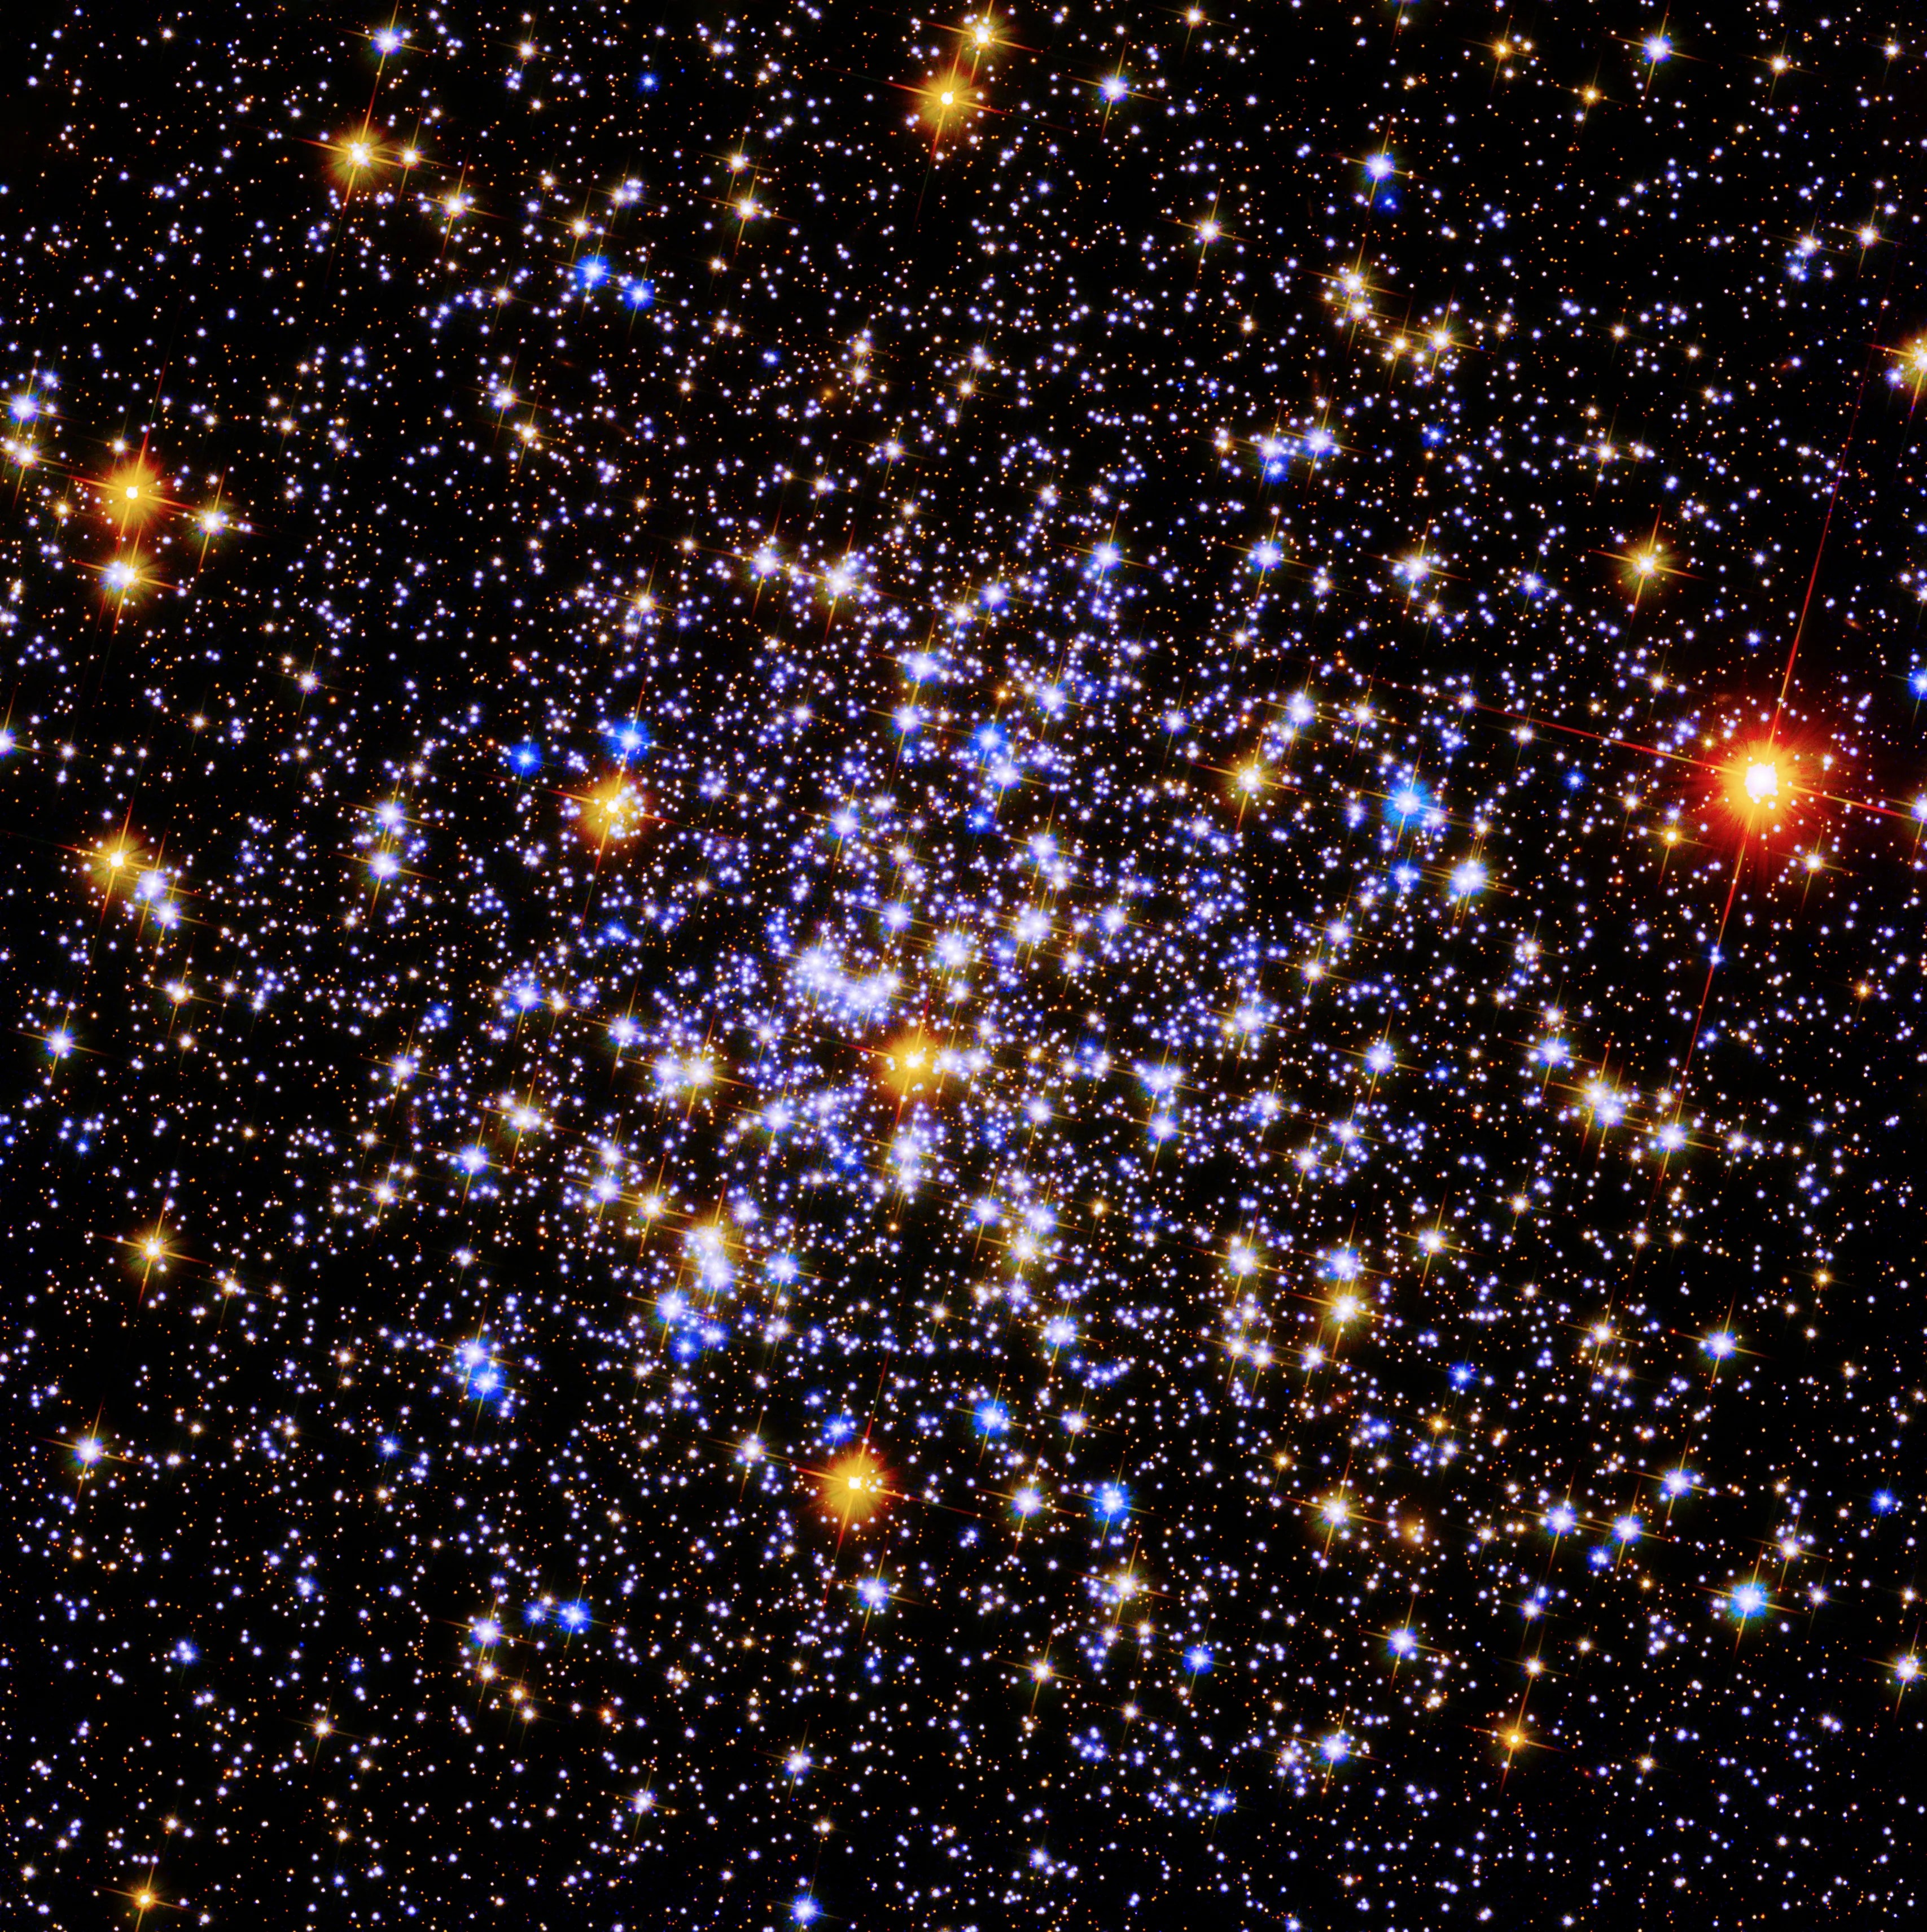 A cluster of bright blue and yellow stars against the black background of space. A single bright red star is to the far right.